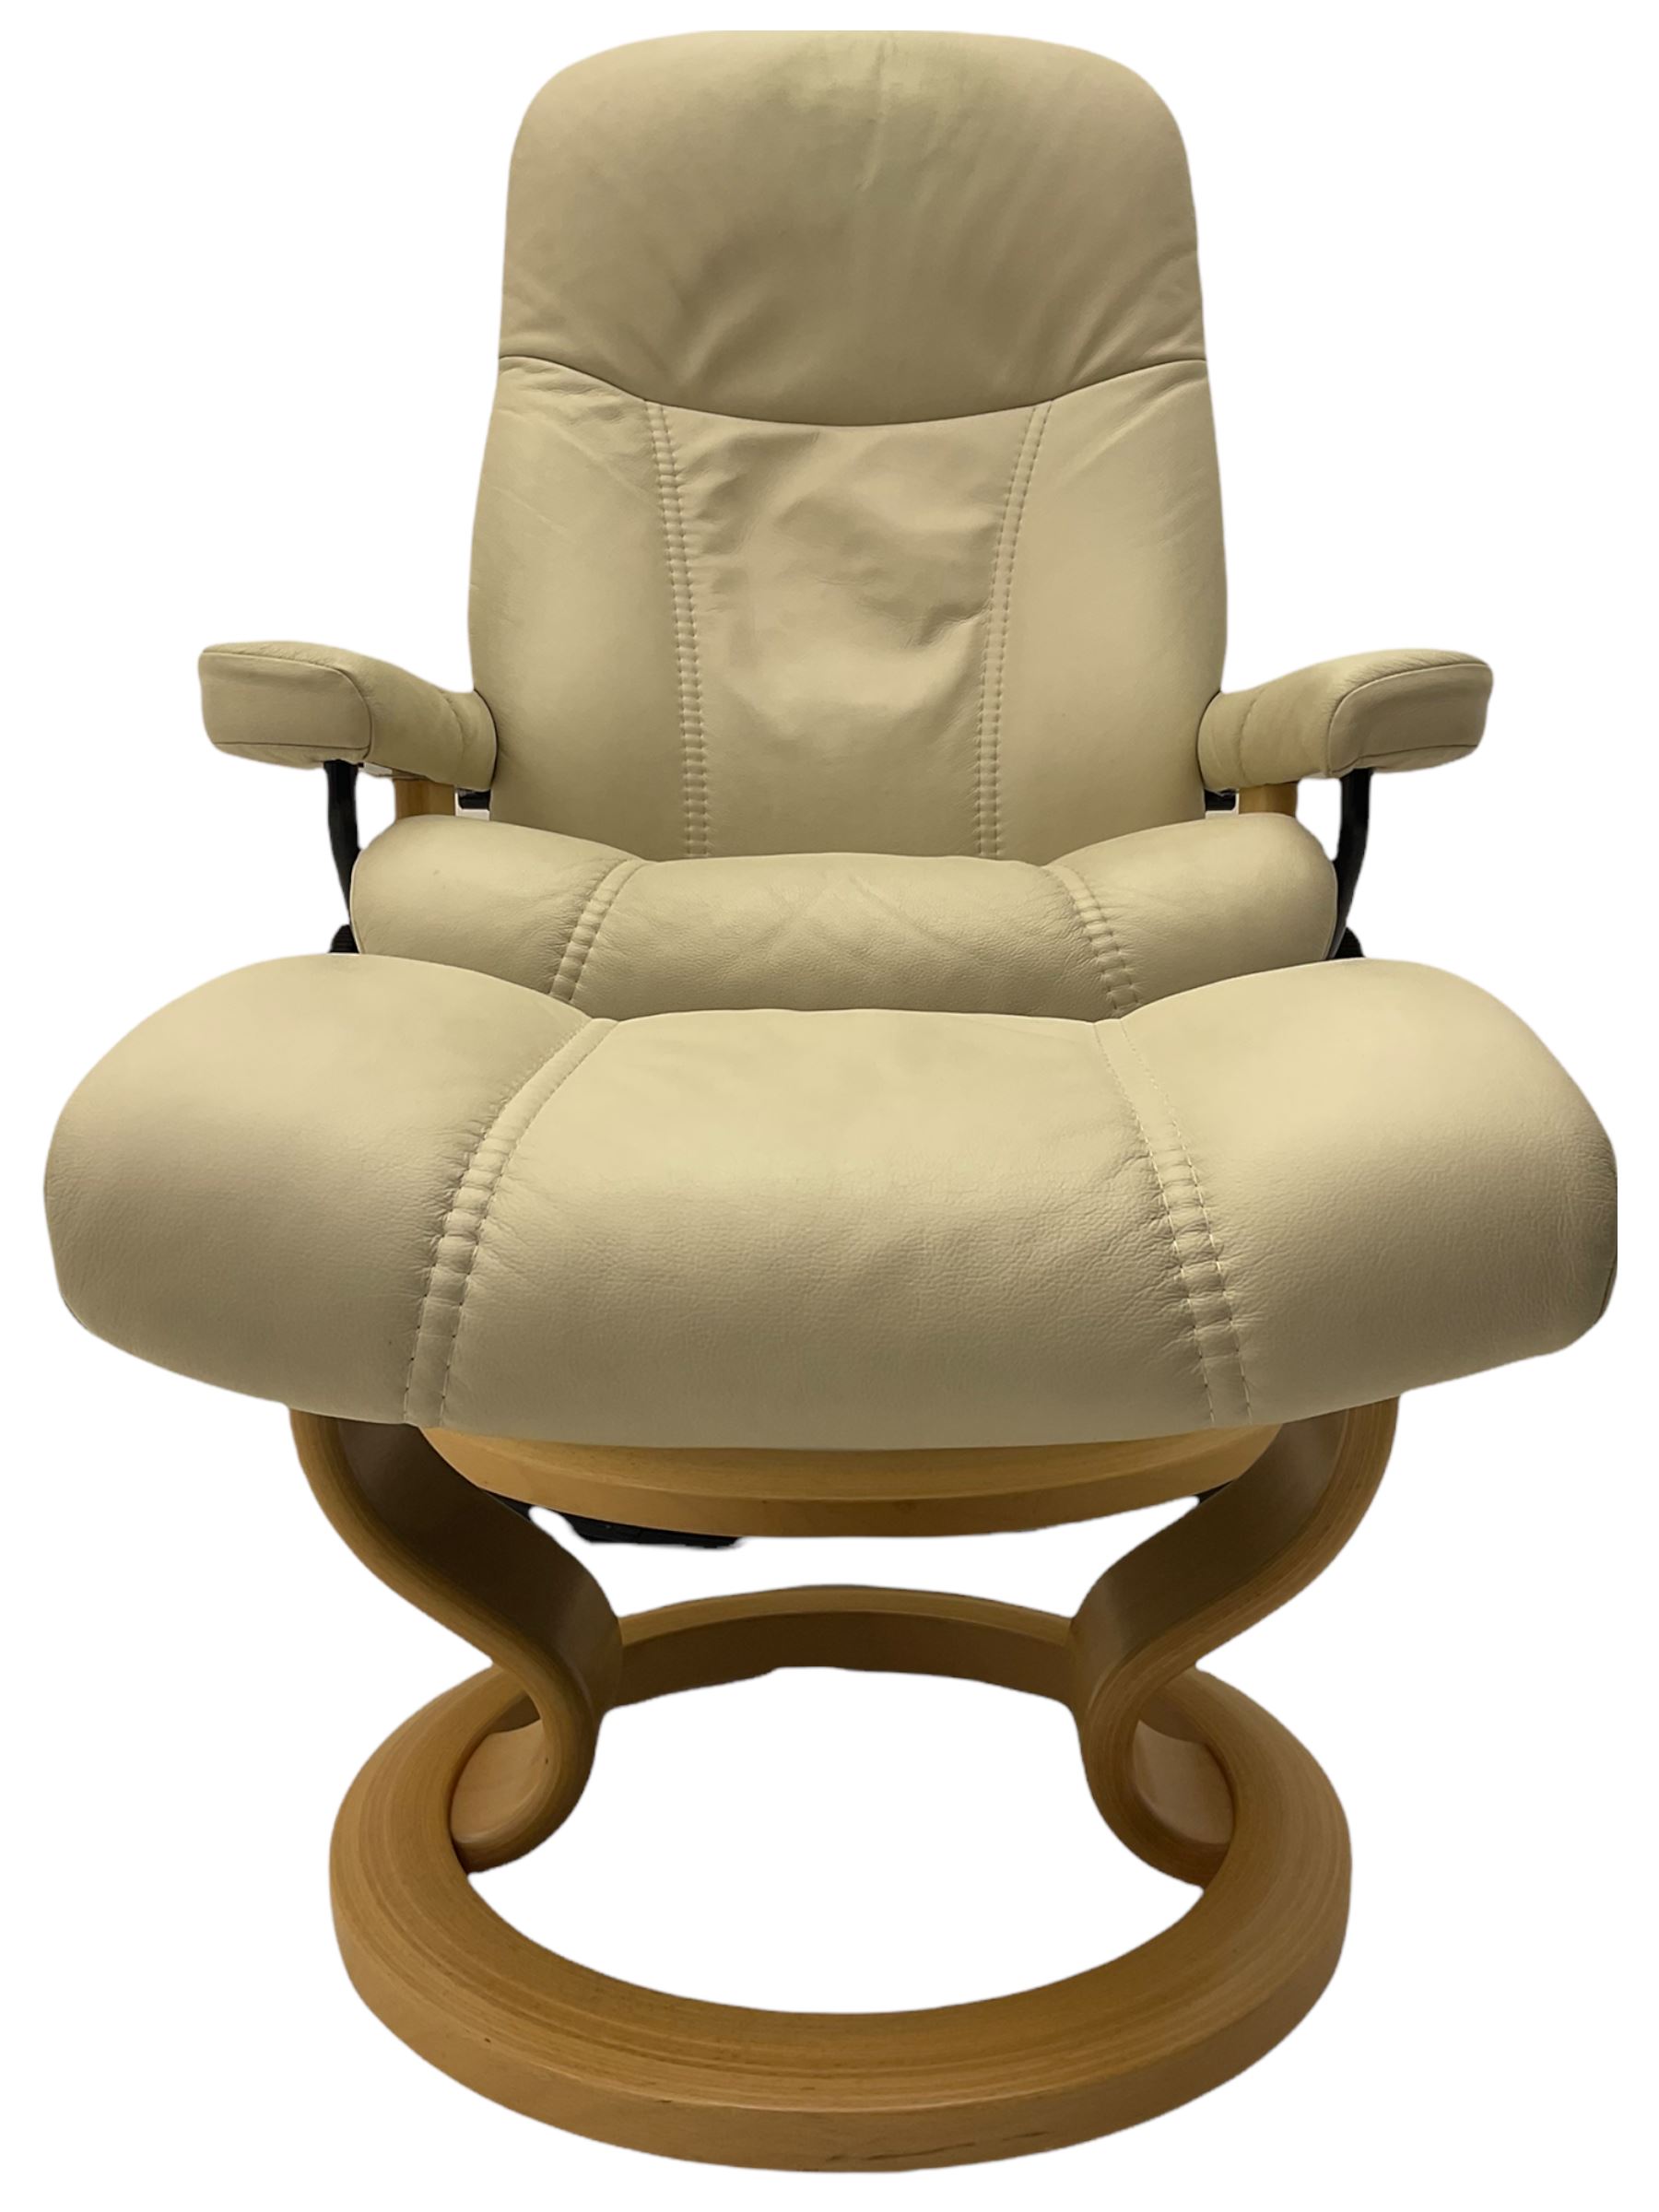 Ekornes - Stressless armchair upholstered in cream leather with matching footstool - Image 6 of 16